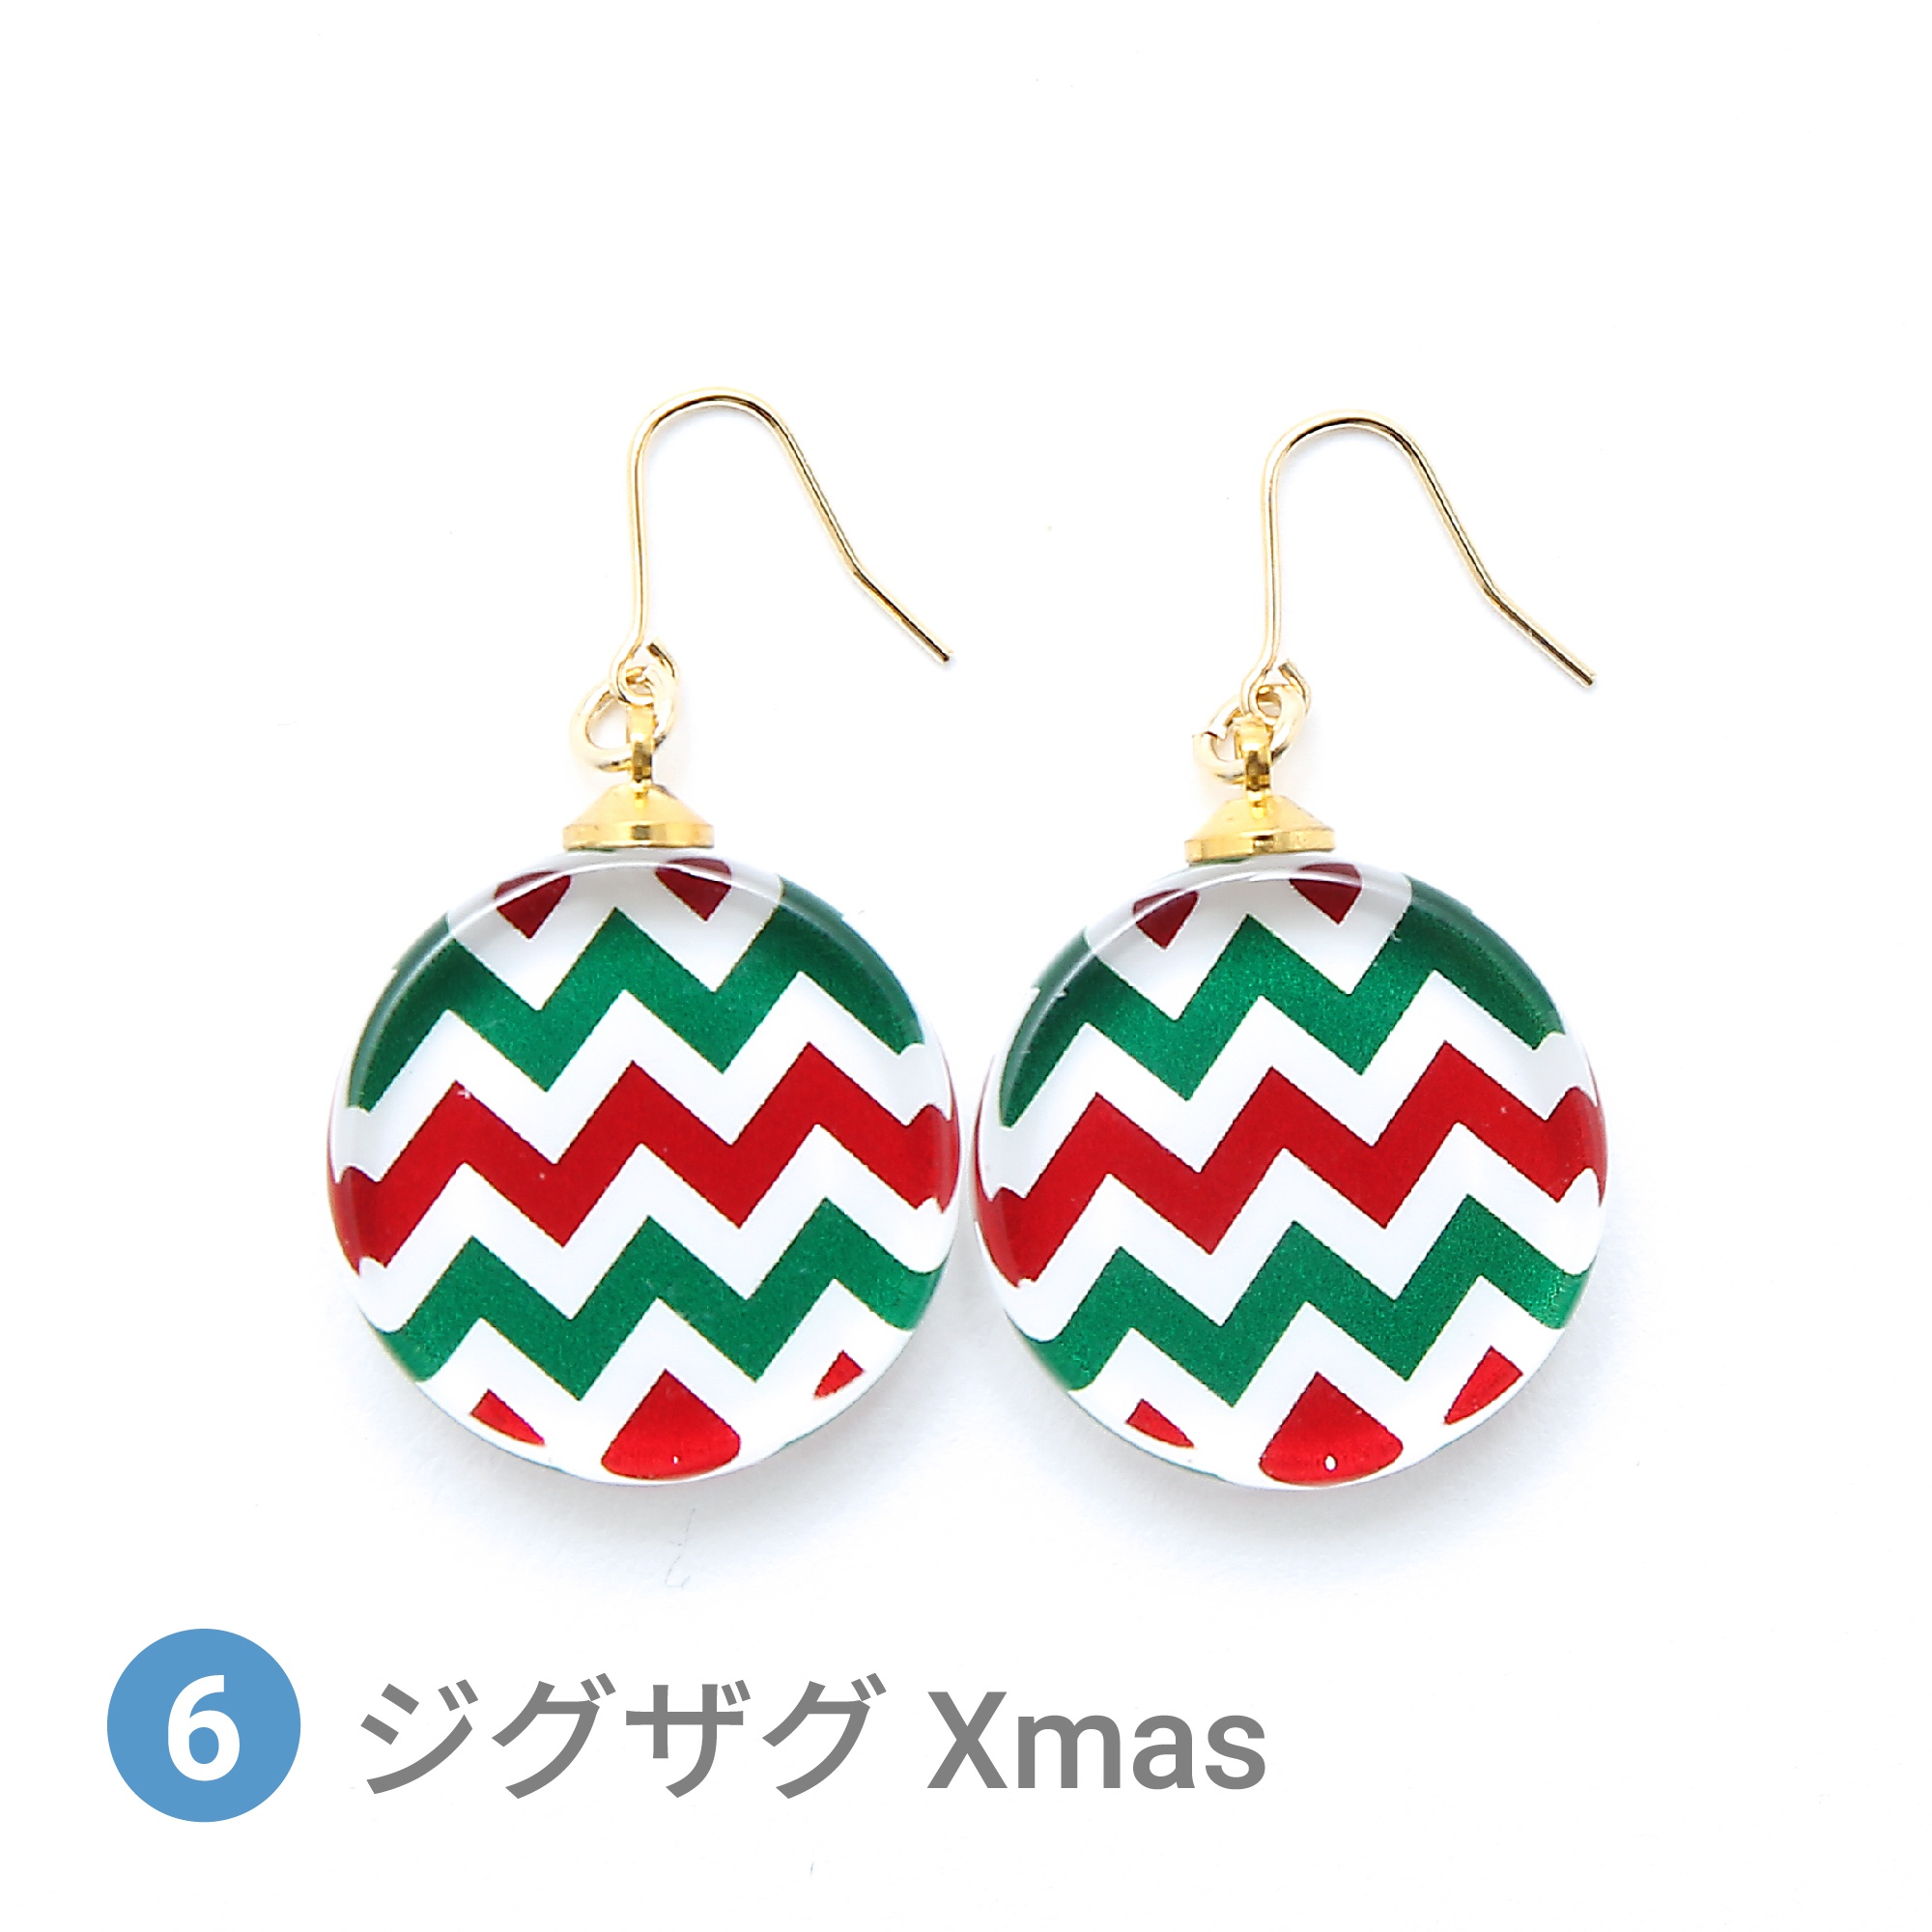 Glass accessories Pierced Earring Xmas color zigzag round shape